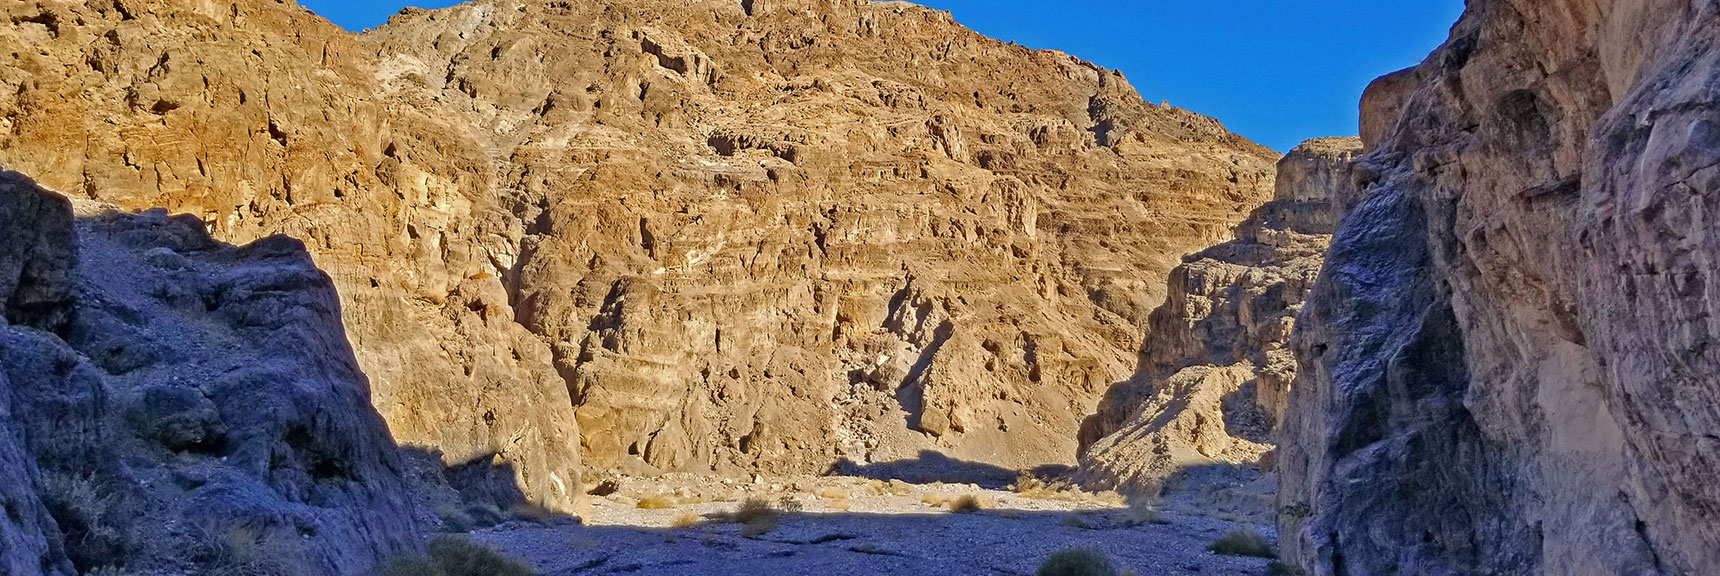 Canyon Walls Composed of Banded Bonanza King Orange and Black Dolomite and Limestone | Fall Canyon | Death Valley National Park, California